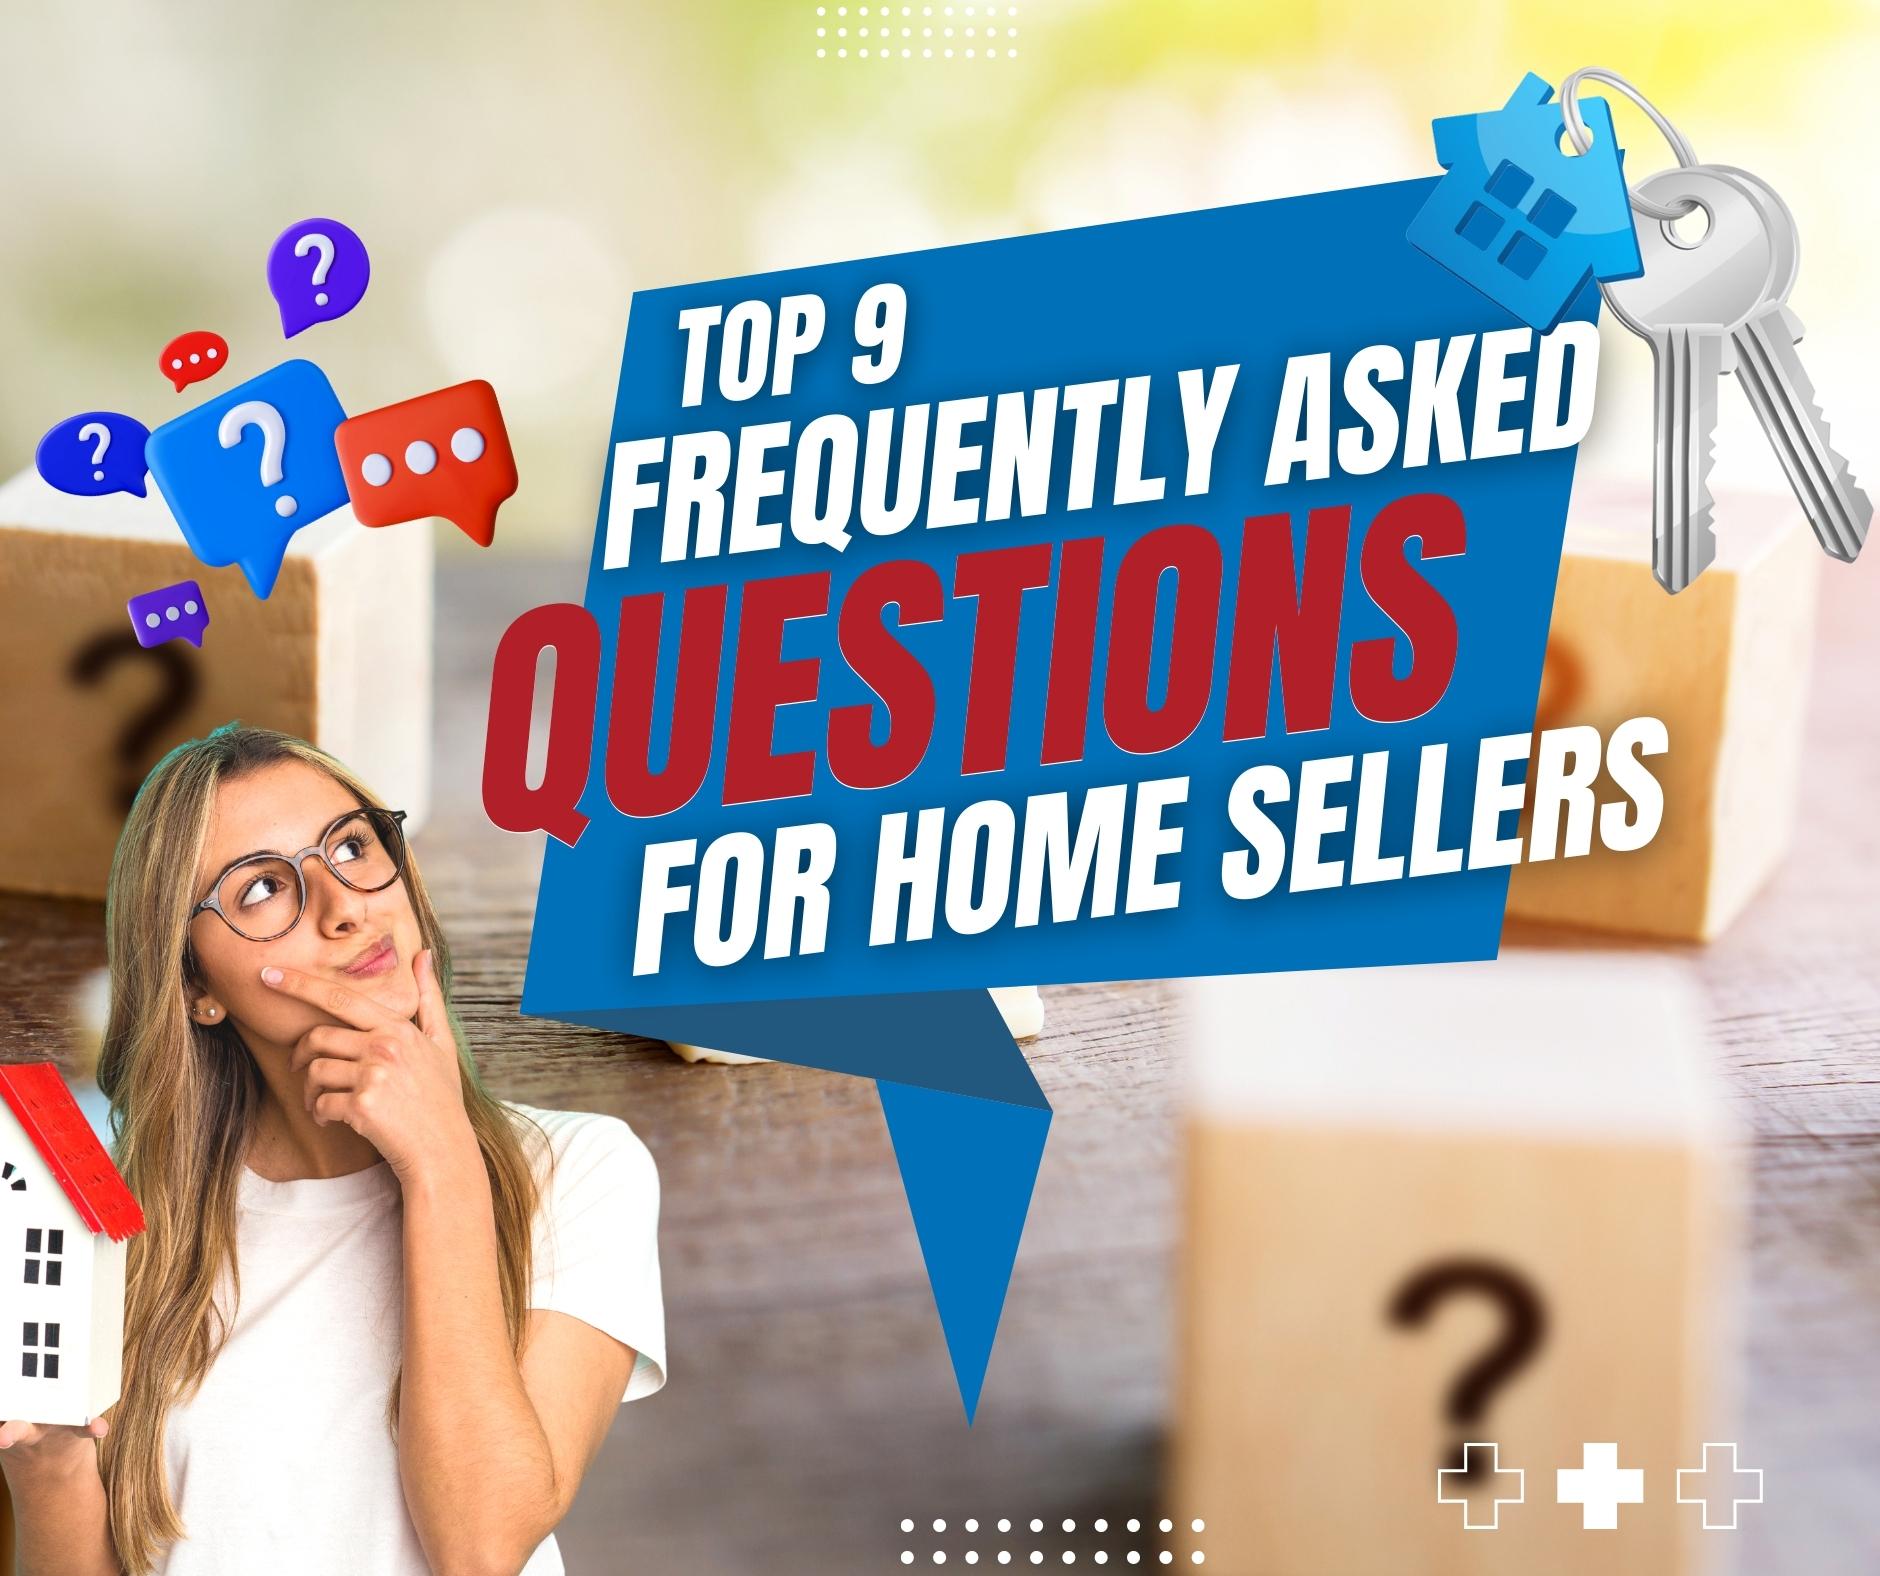 Top 9 Frequently Asked Questions For Home Sellers